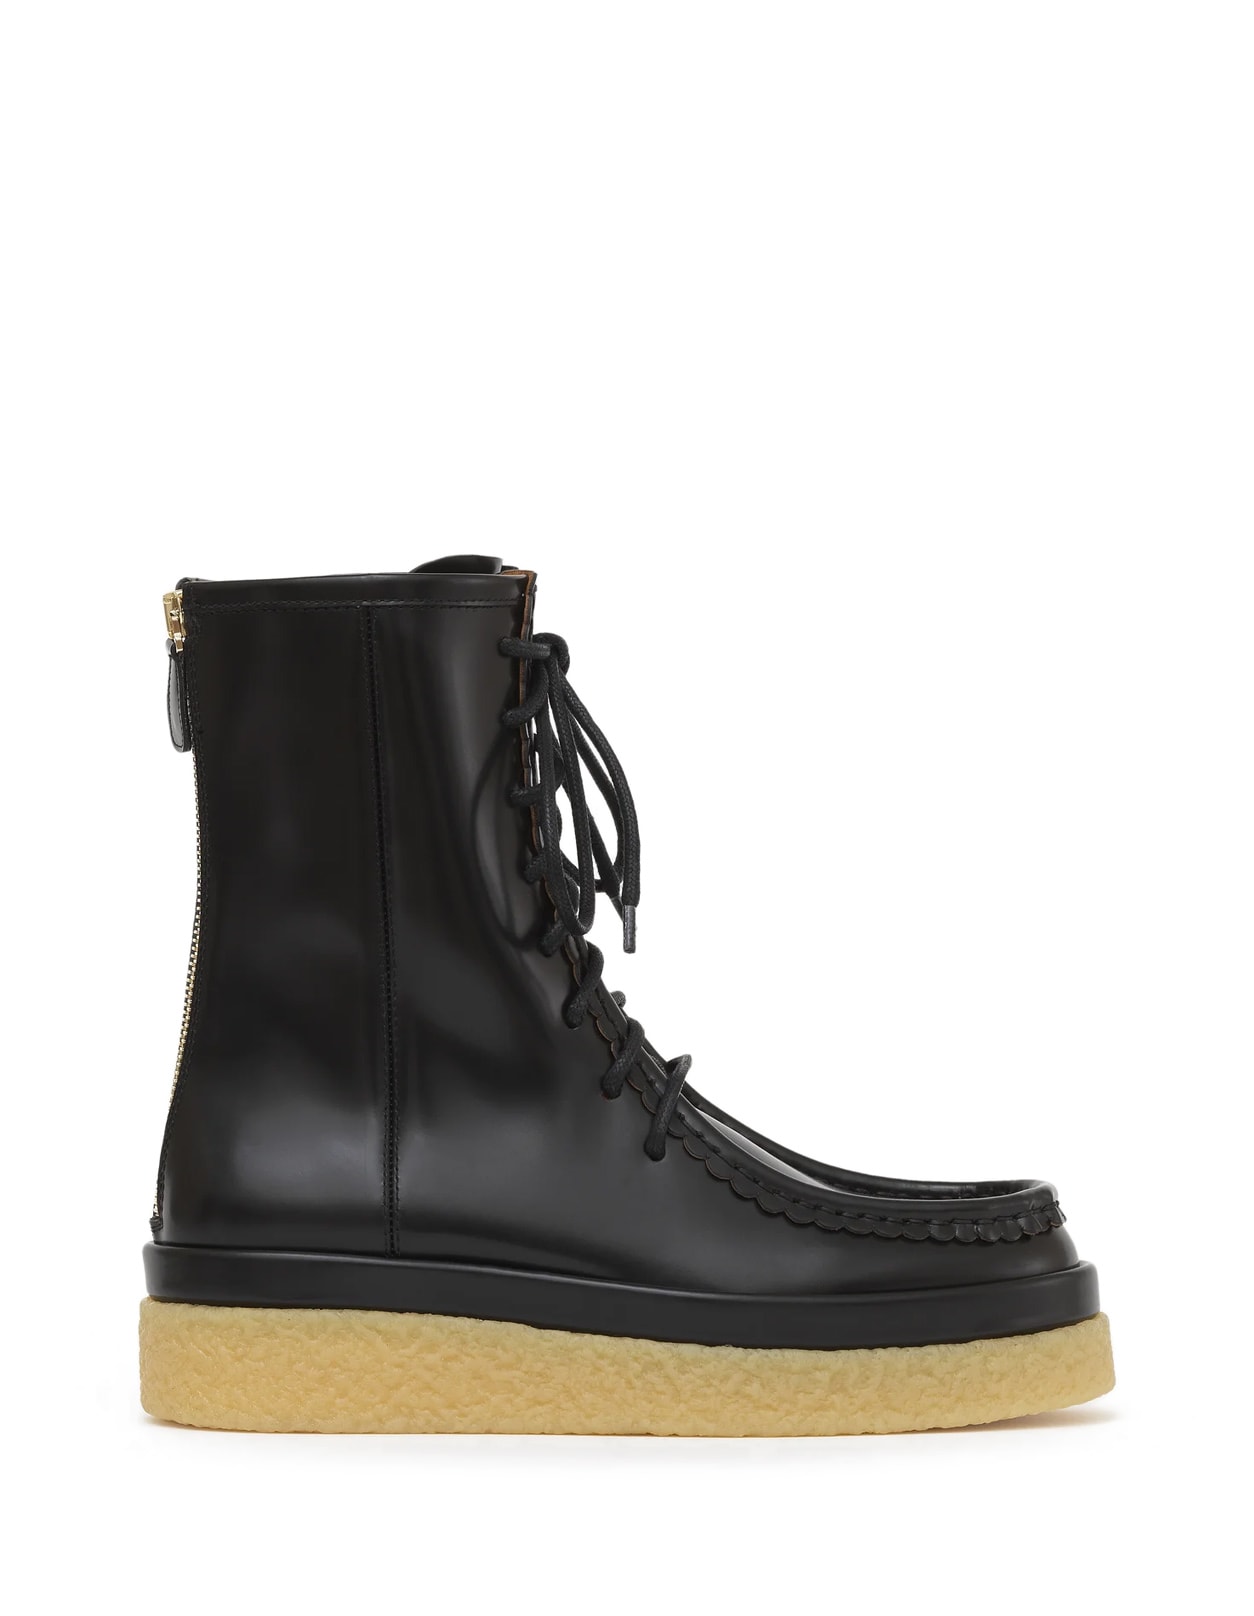 Chloé Woman Jamie Medium Ankle Boot In Black Leather